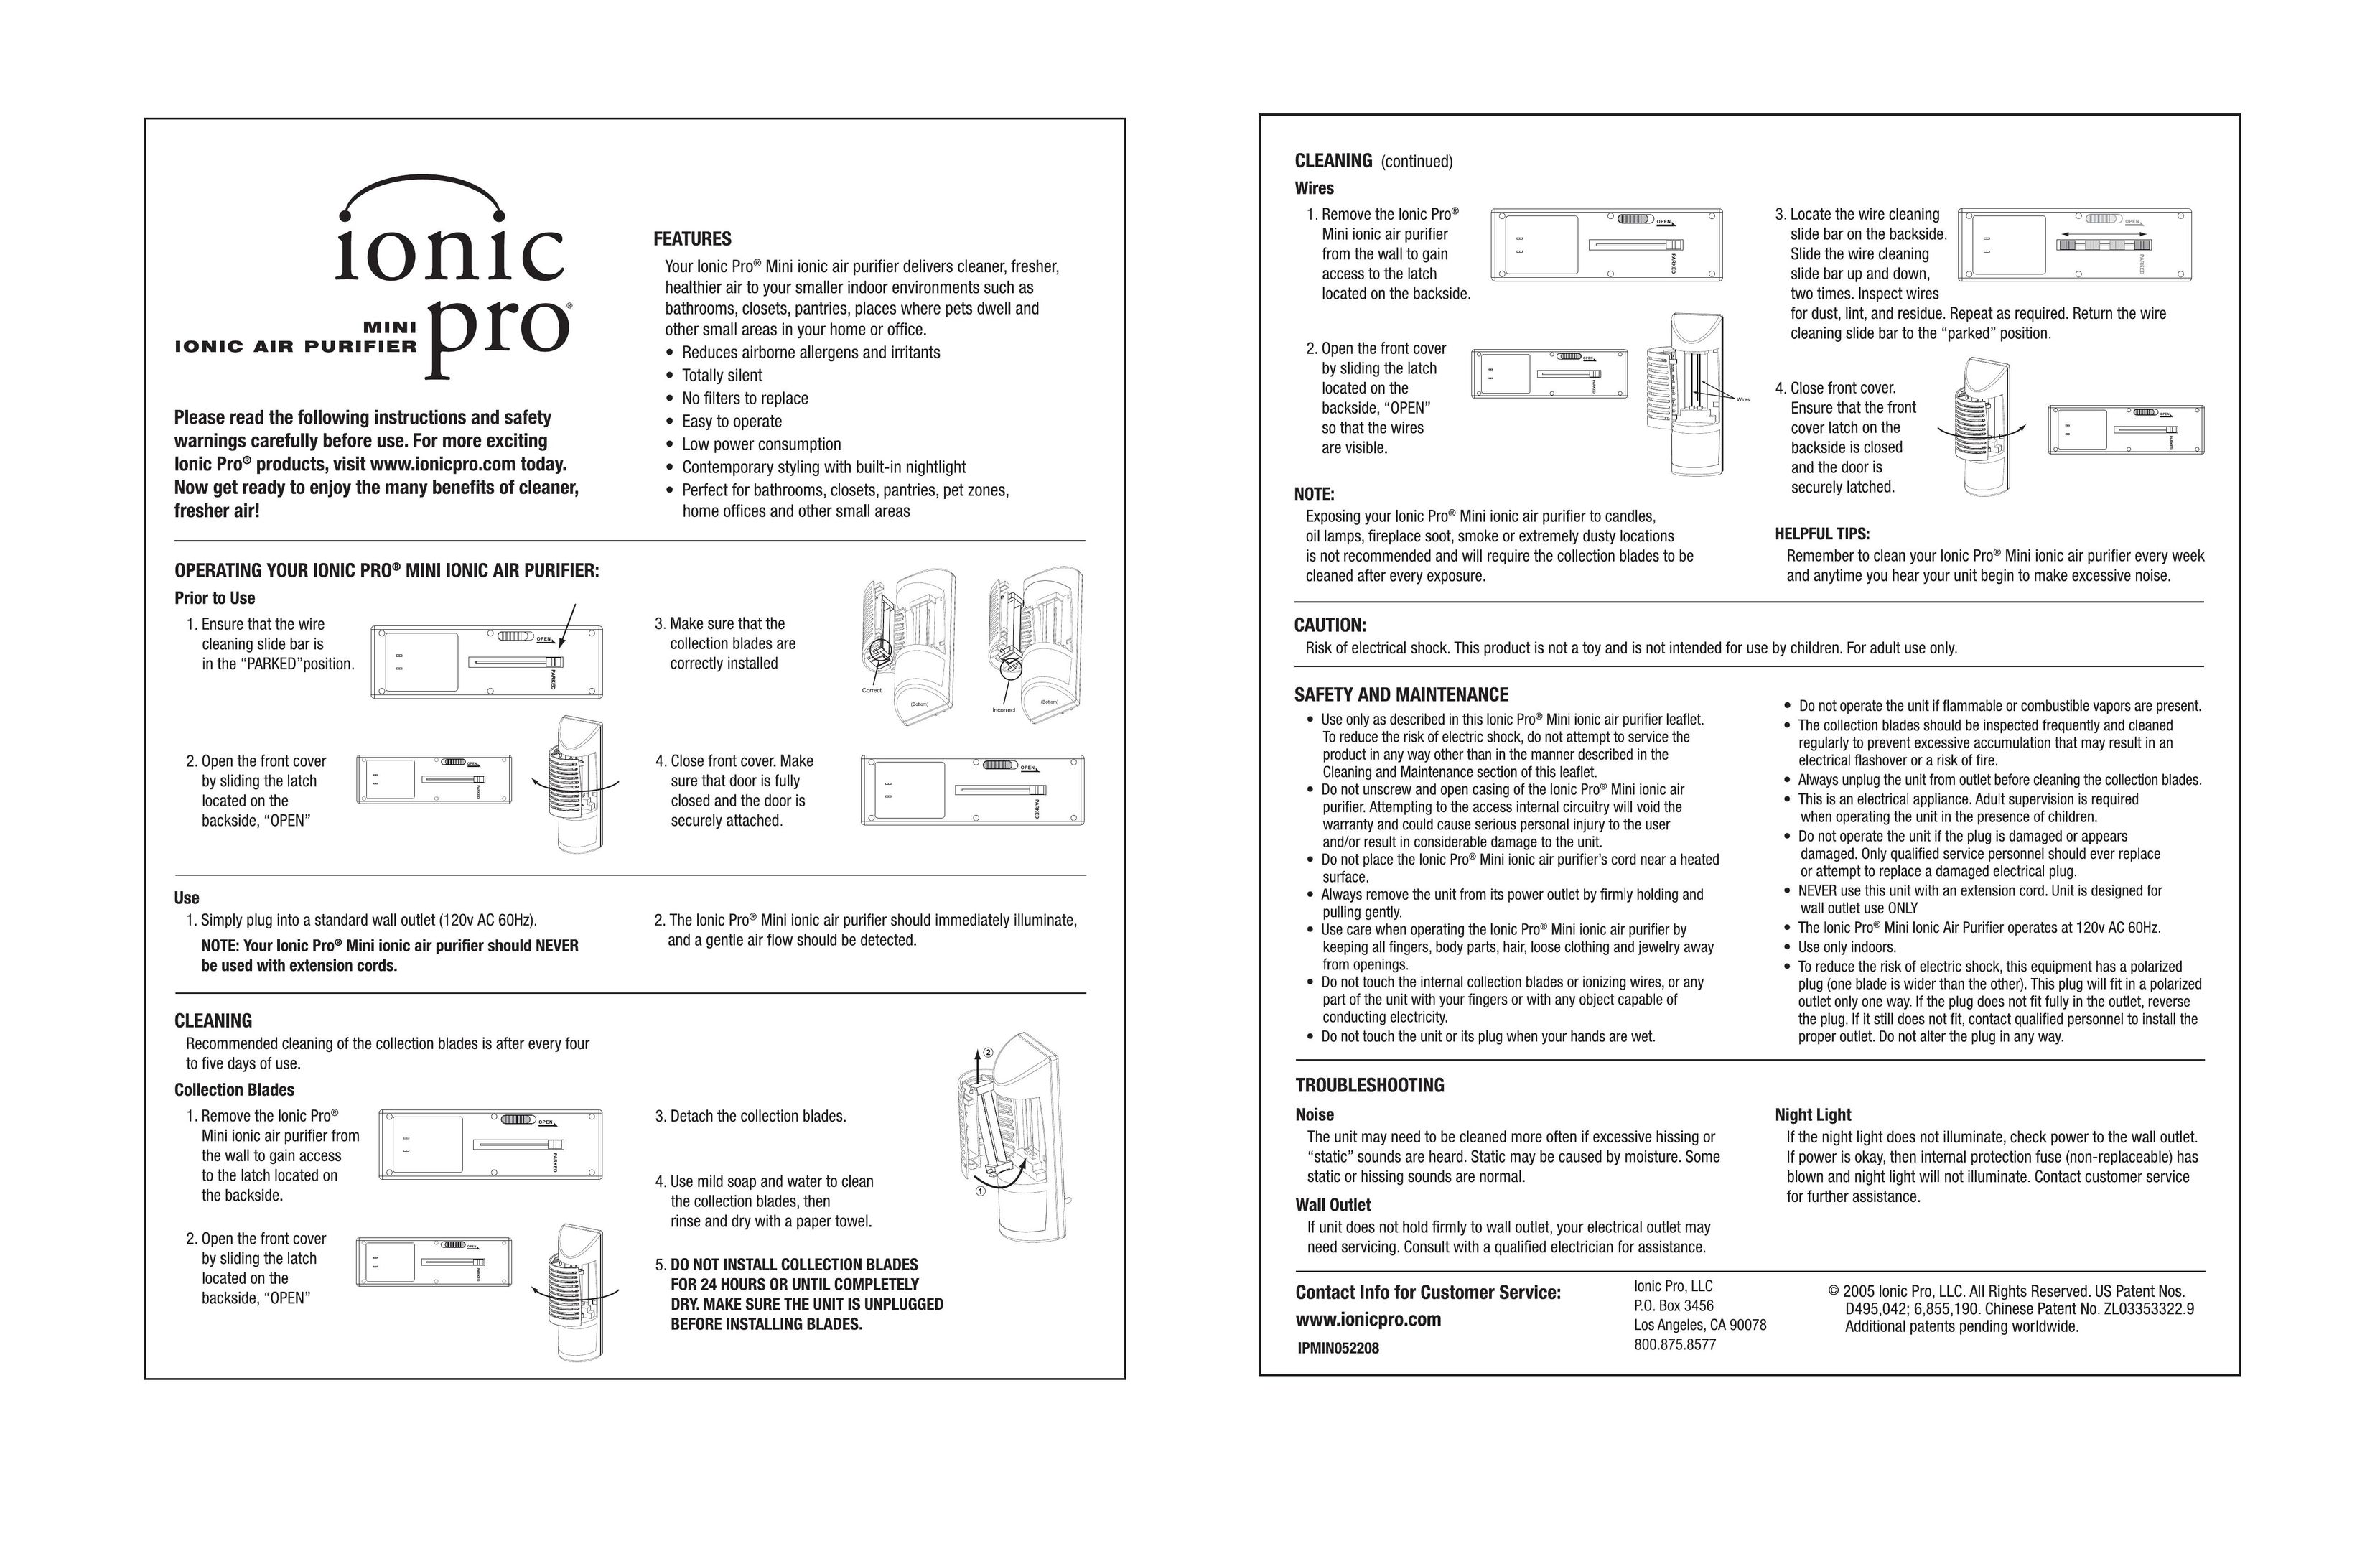 Ionic Pro IPMIN052208 Air Cleaner User Manual